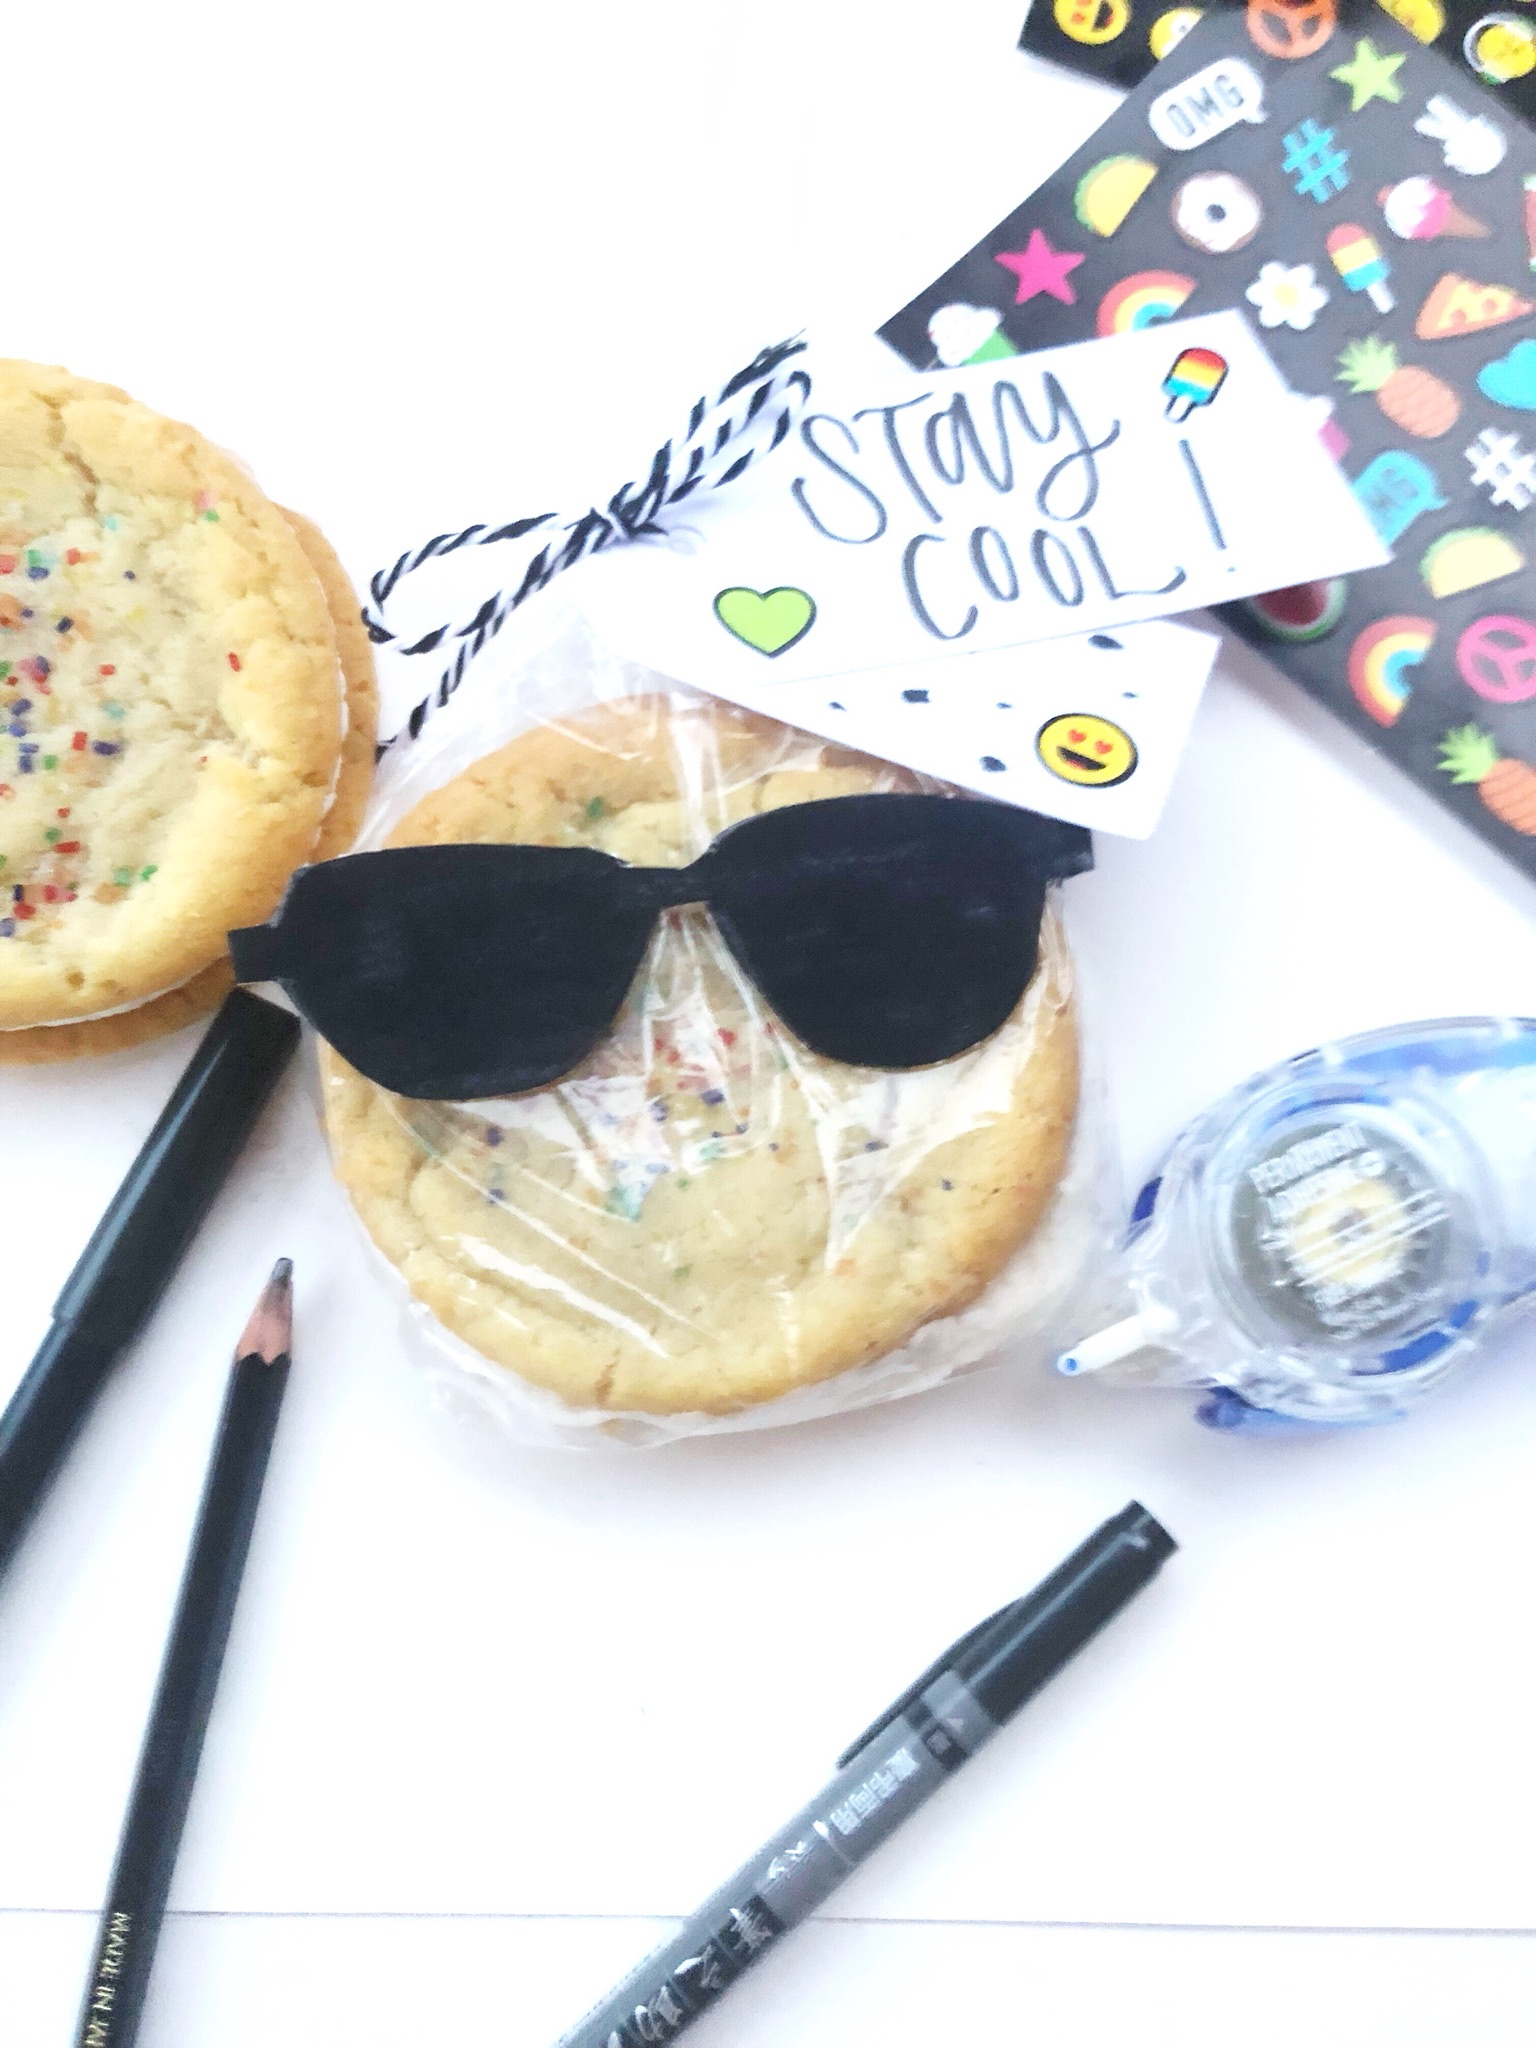 Lauren Fitzmaurice of Renmade Calligraphy show you how to create a fun emoji inspired favor bag that is perfect for my summer time event! The tutorial uses awesome lettering and craft tools from Tombowusa.com.